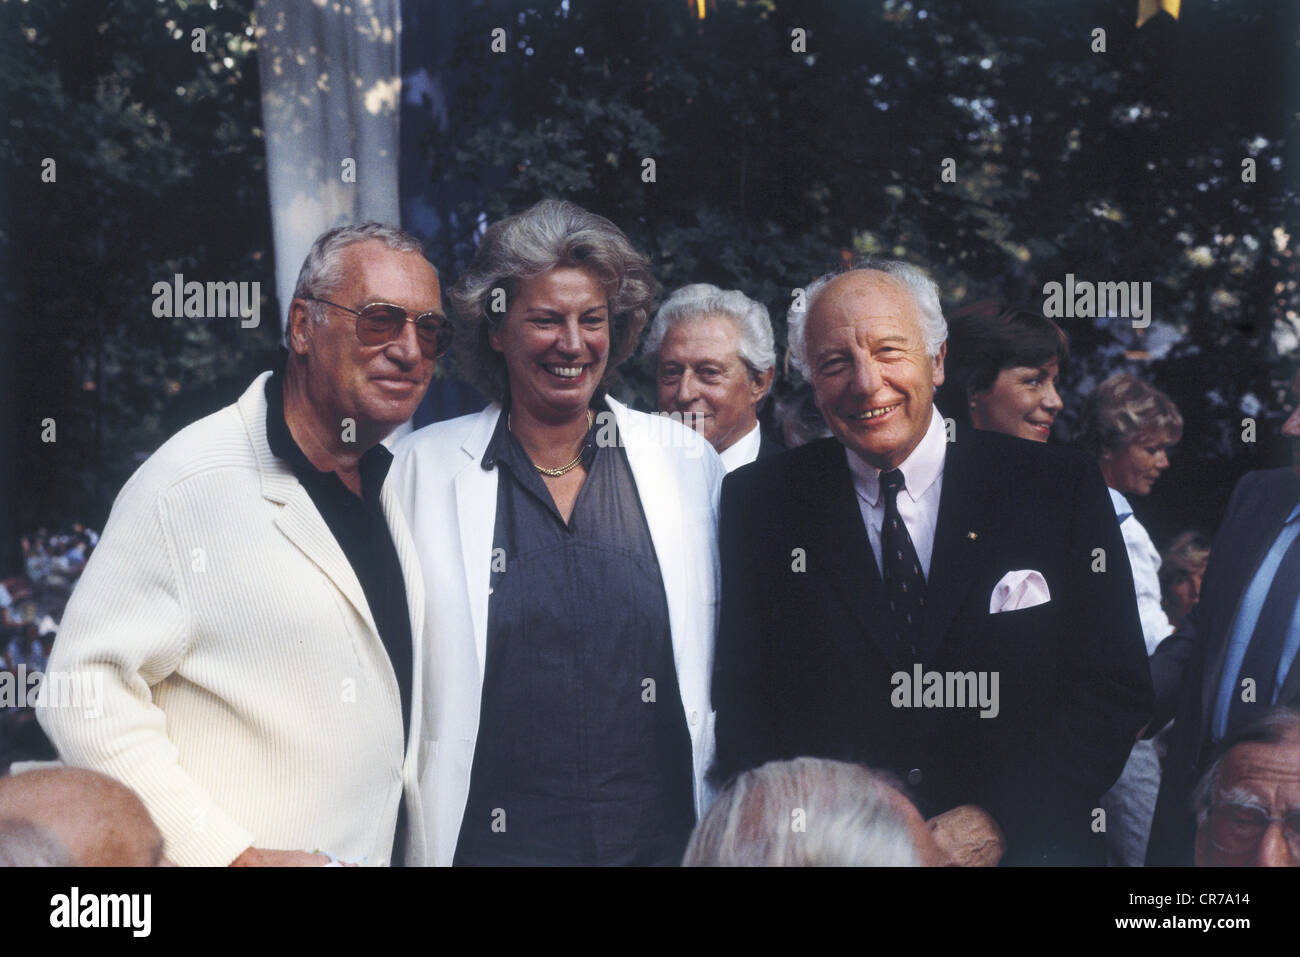 Scheel Walter 8.7.1919 - 24.8.2016, German politician (FDP), group picture, with his wife Mildred and film producer Helmut Ringelmann in a beer garden, birthday party of the author and journalist Siegfried 'Sigi' Sommer, Munich, August 1984, Stock Photo